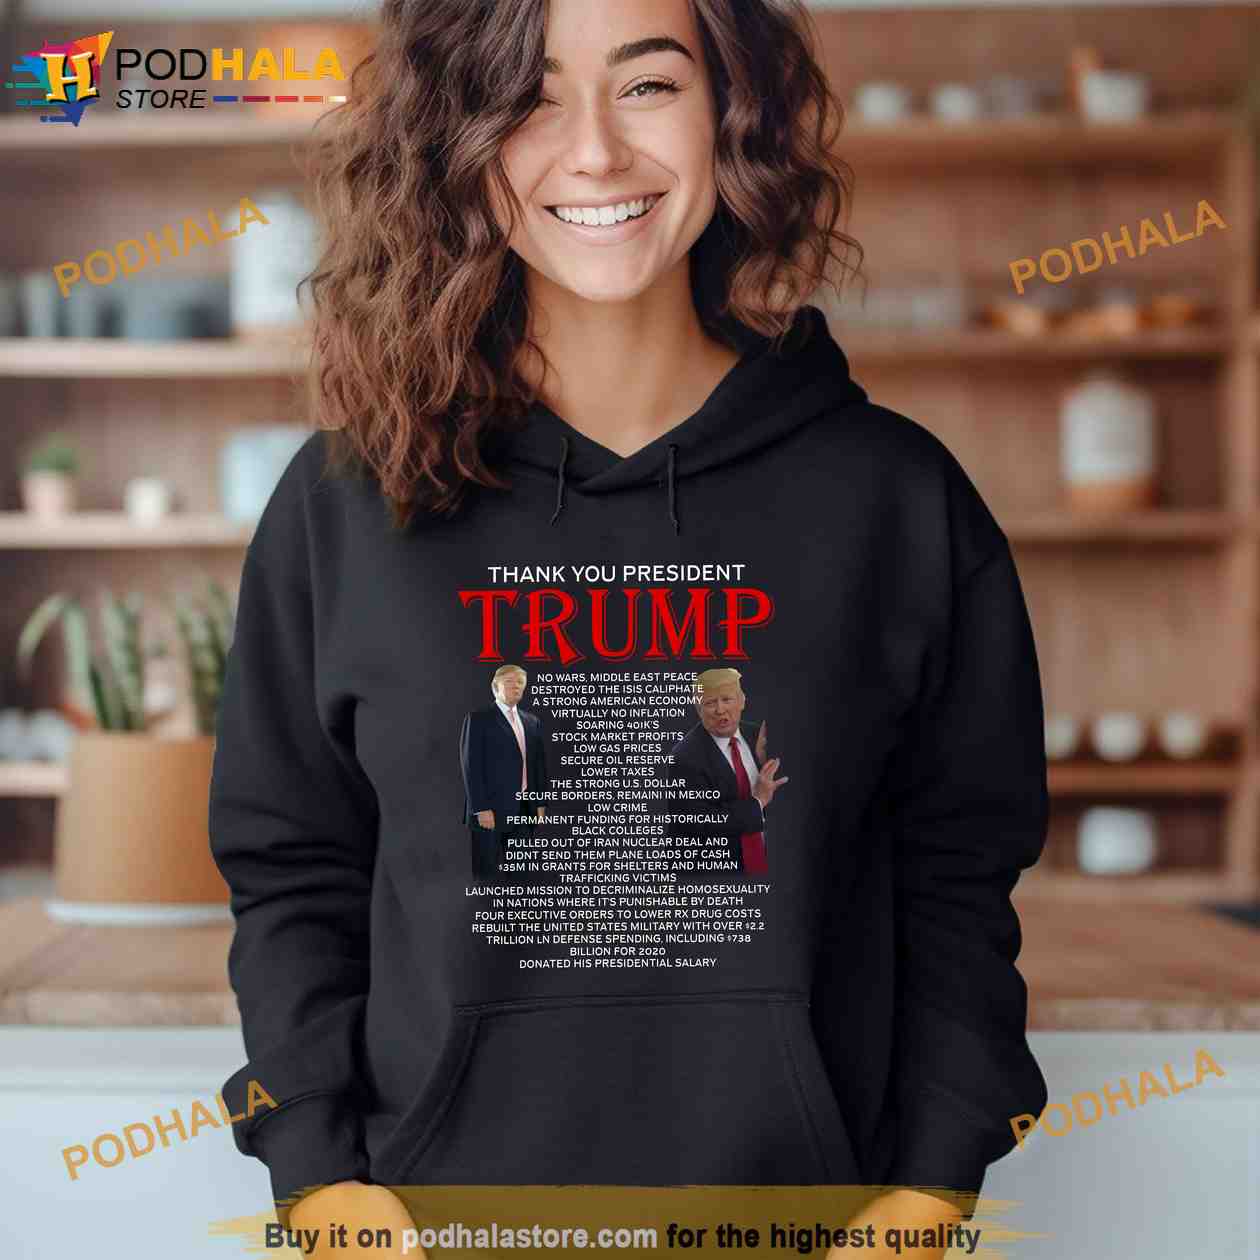 Thank You President Trump Shirt, Destroyed The Isis Caliphate, Donald Trump Gifts